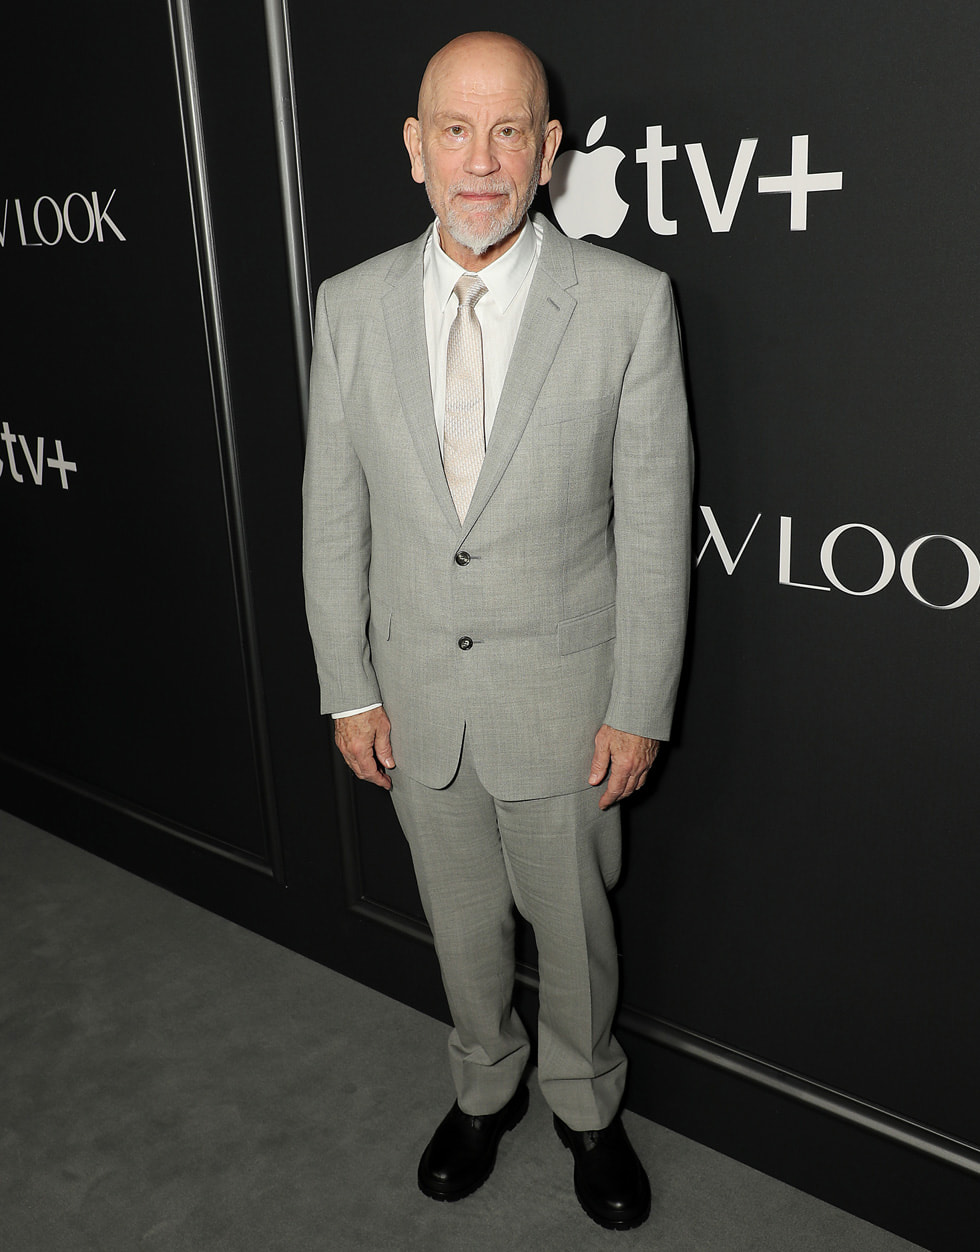 John Malkovich attends the premiere of the Apple TV+ thrilling series “The New Look” at Florence Gould Hall. “The New Look” will make its global debut on Apple TV+ on Wednesday, February 14, 2024.